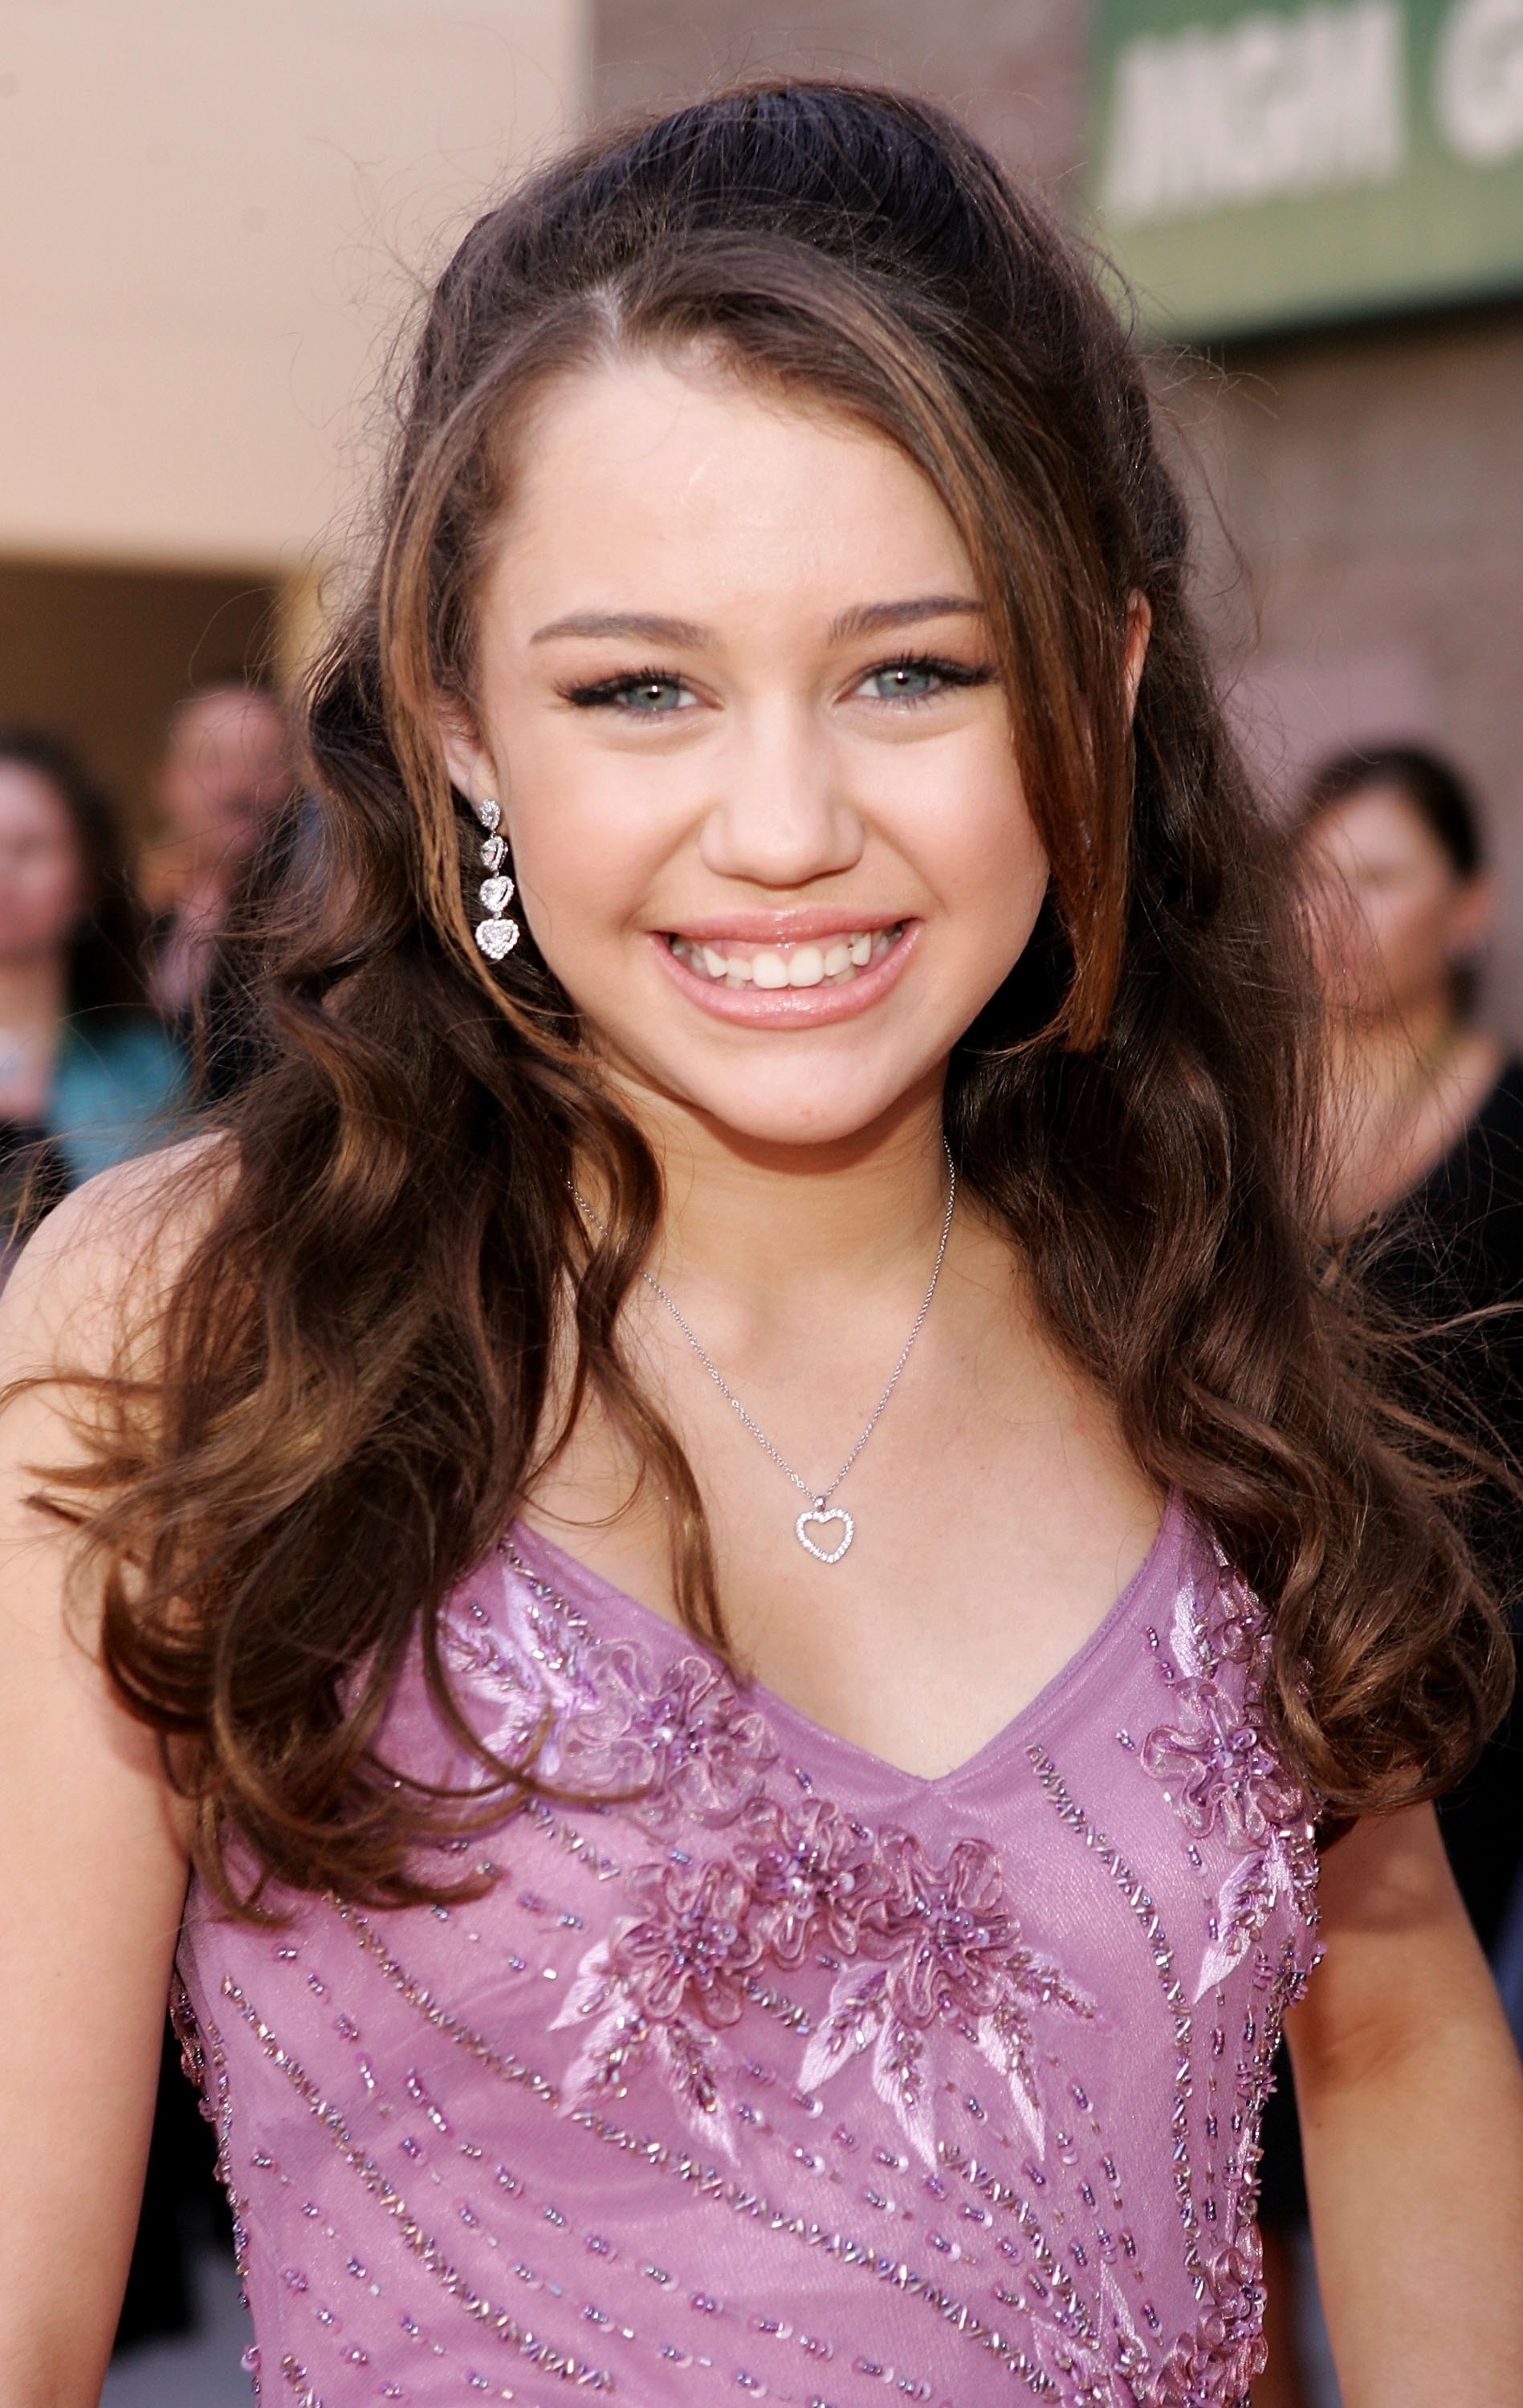 Miley Cyrus at the 41st Annual Academy Of Country Music Awards in 2006